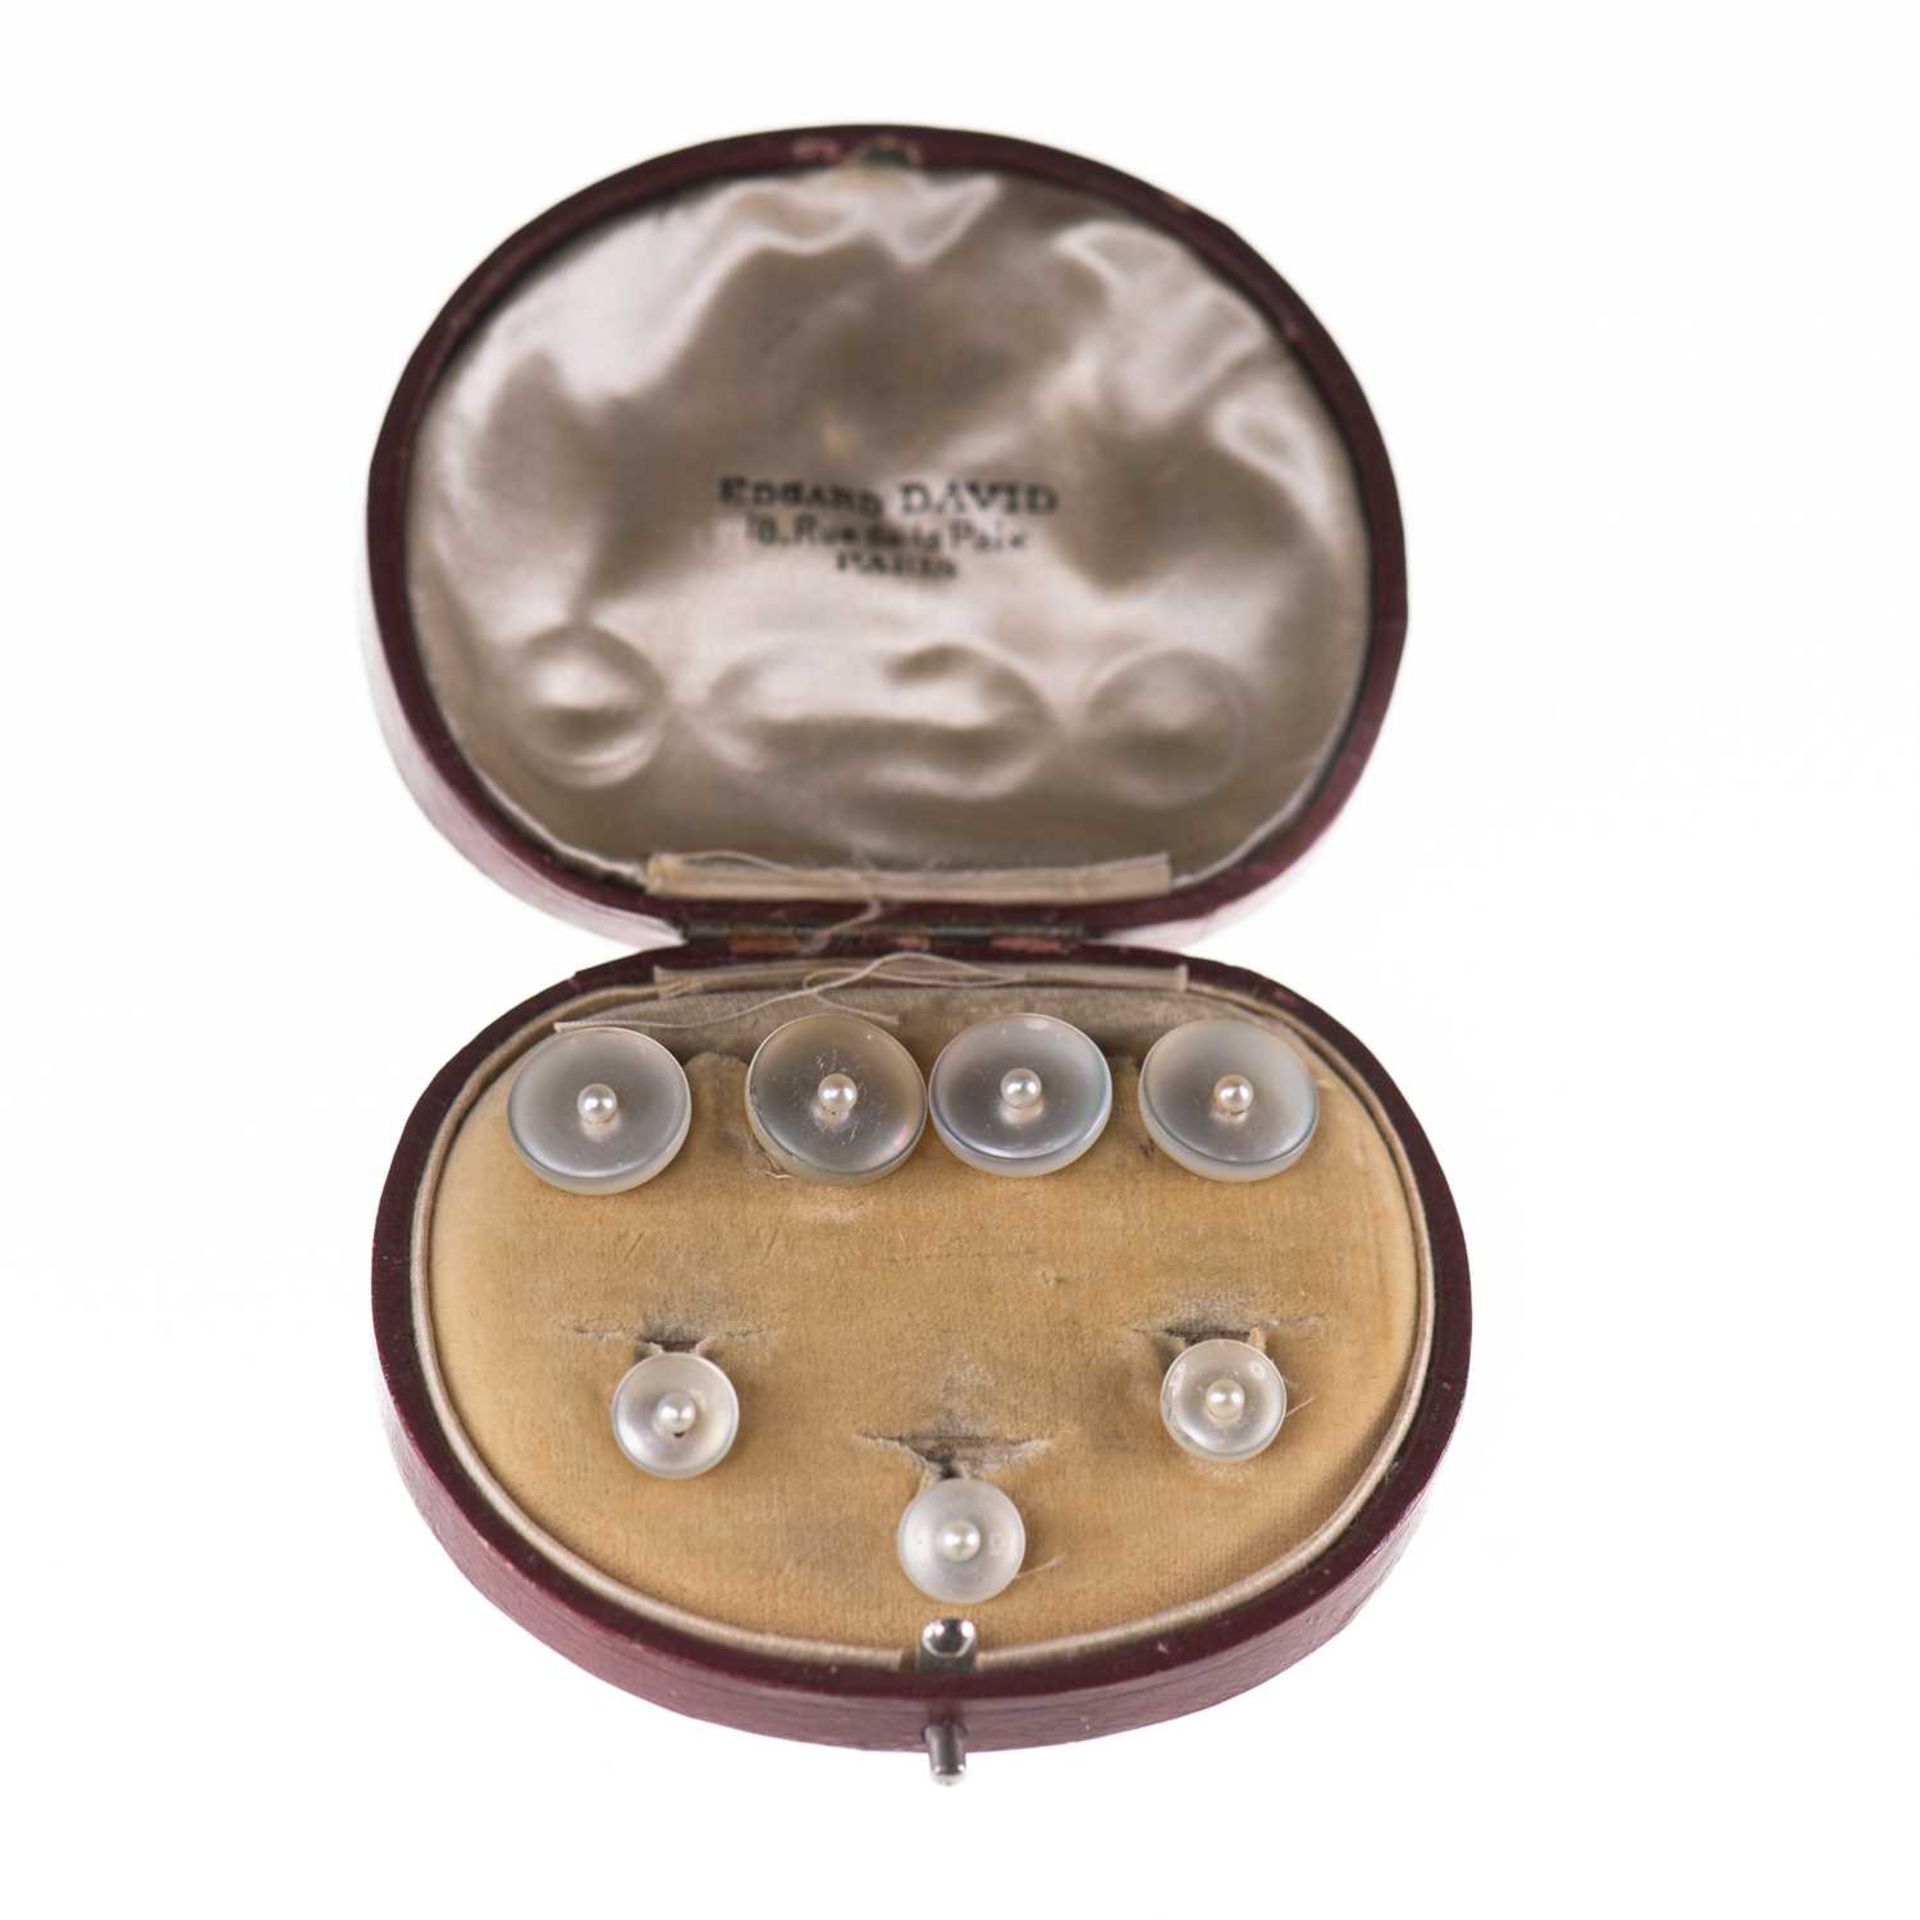 A FRENCH GOLD MOUNTED MOTHER OF PEARL CUFFLINK AND SHIRT STUD SET